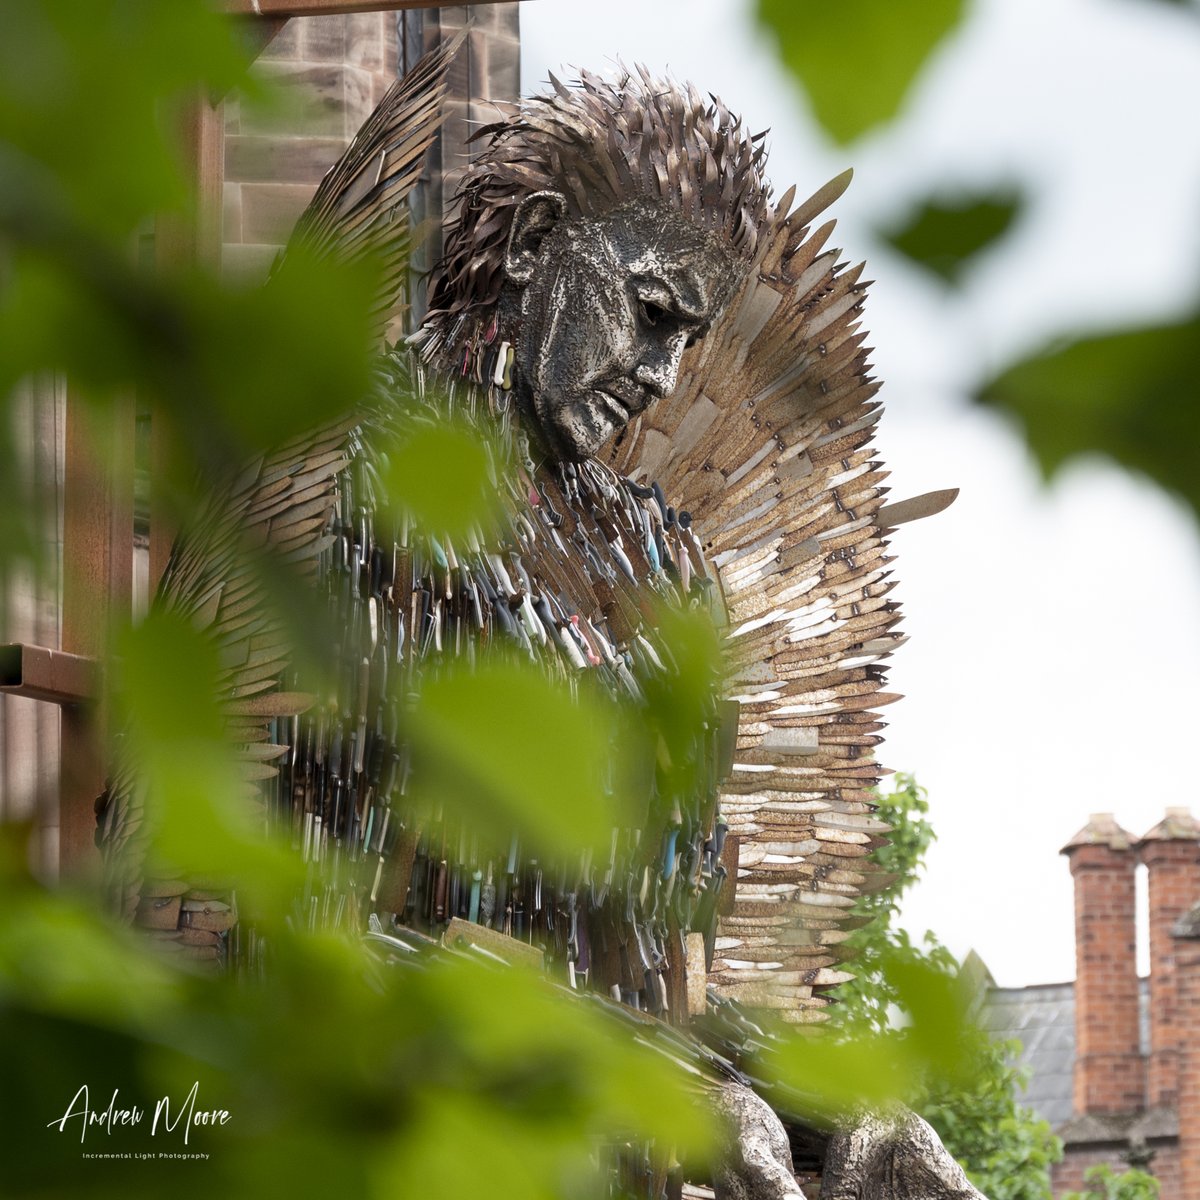 Tomorrow we say a sad farewell to #knifeangel from @HFDCathedral.
What an amazing feat to bring together a community and what wonderful photos have been posted across social media.  Thank you @AlfieBradley1  
I have loved photographing it through sun, rain and now through trees!